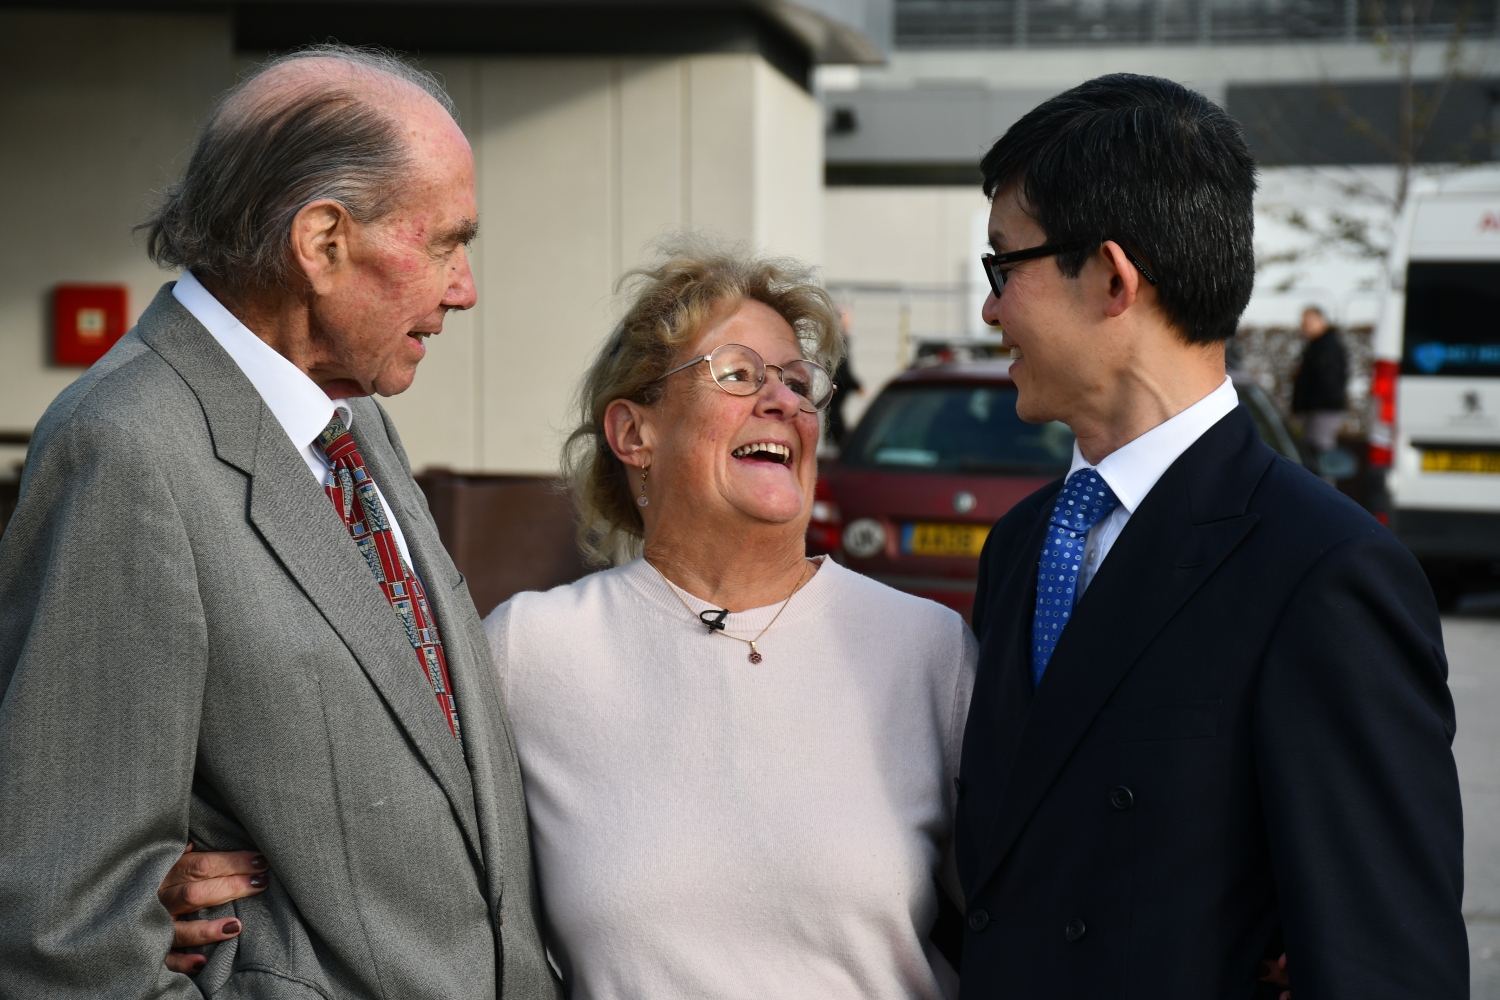 Sandy stands outside between two men in suits, all are smiling and hugging.